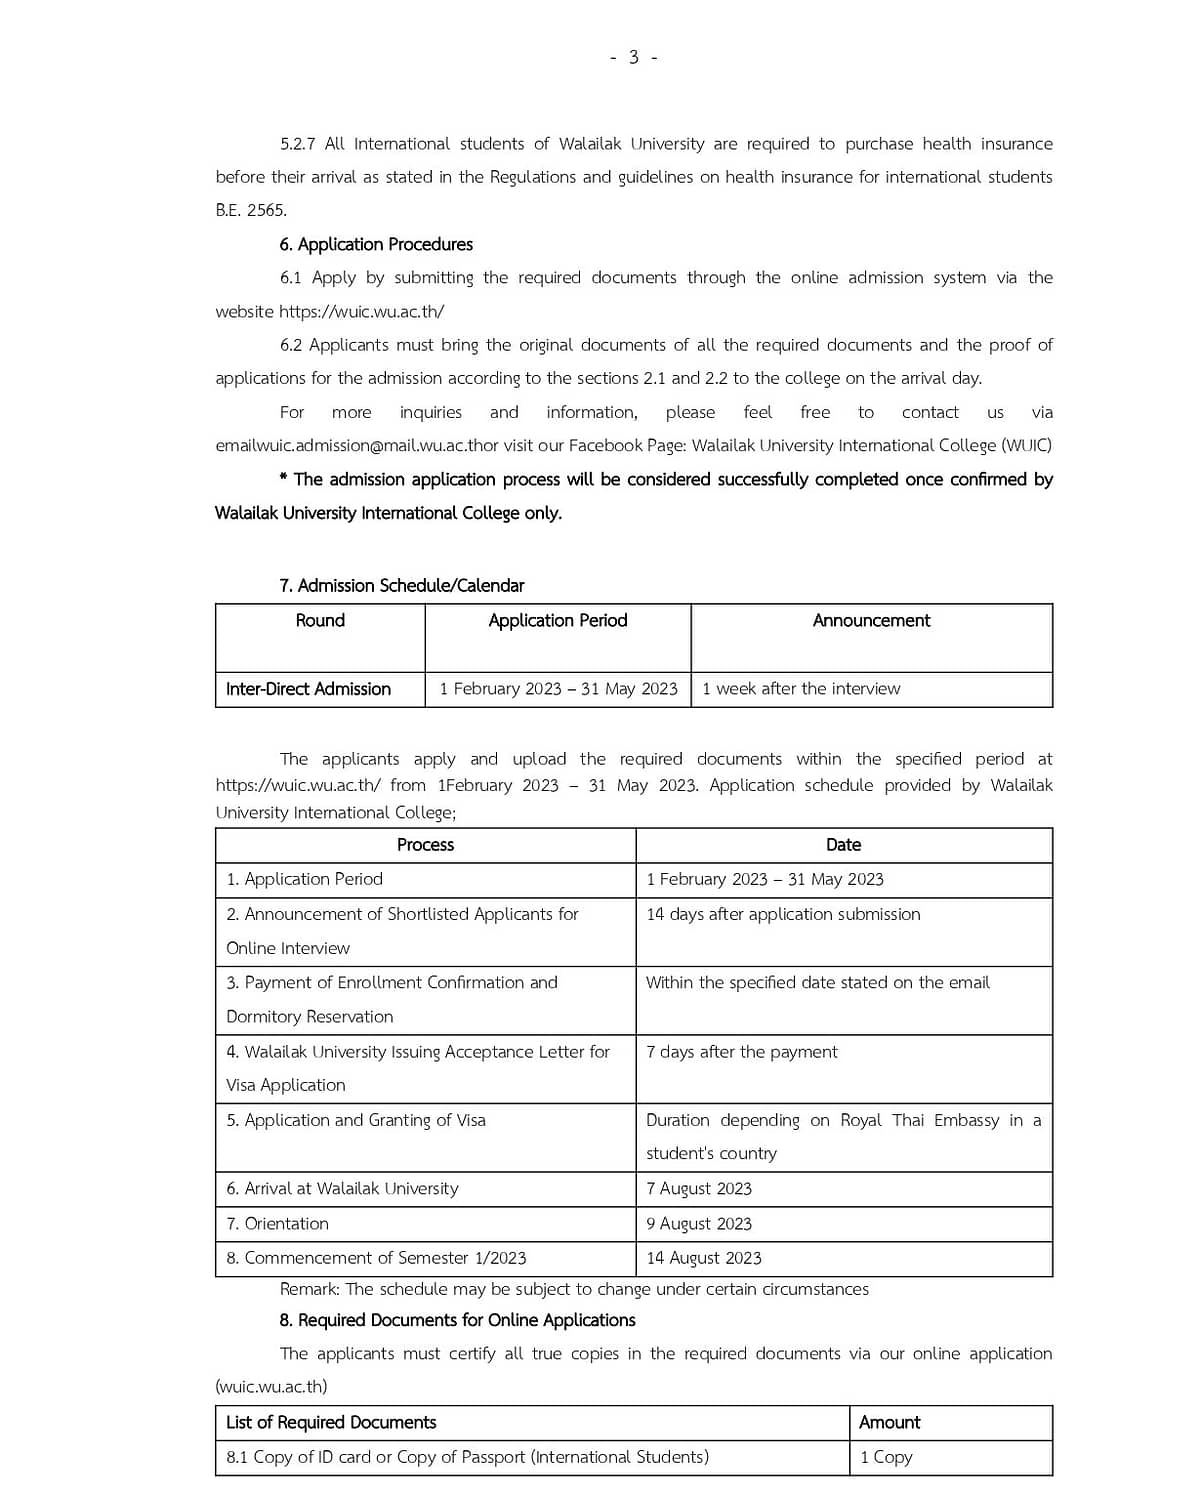 Announcement of Walailak University International College Walailak University Notification on Undergraduate Admissions in Bachelor of Business Administration (International Program) Walailak University International College (WUIC) Academic Year 2023